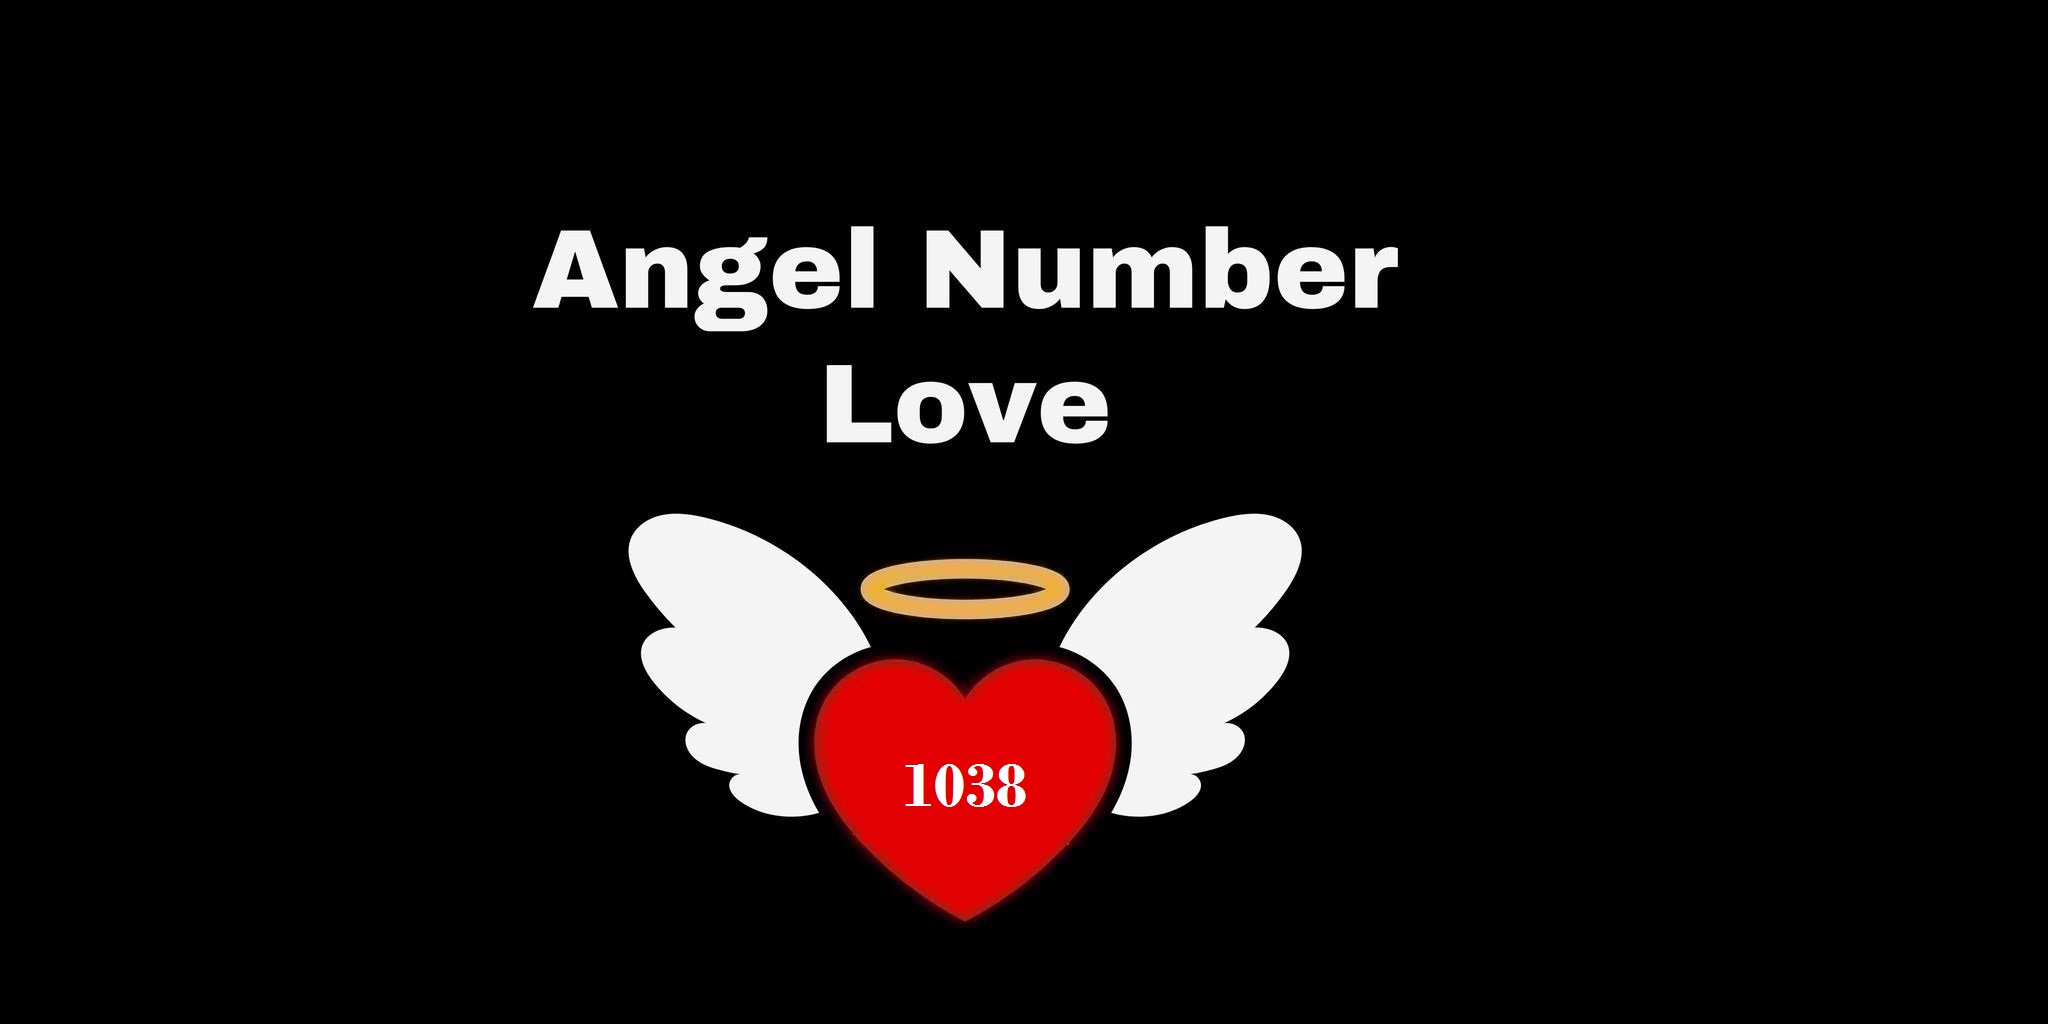 1038 Angel Number Meaning In Love